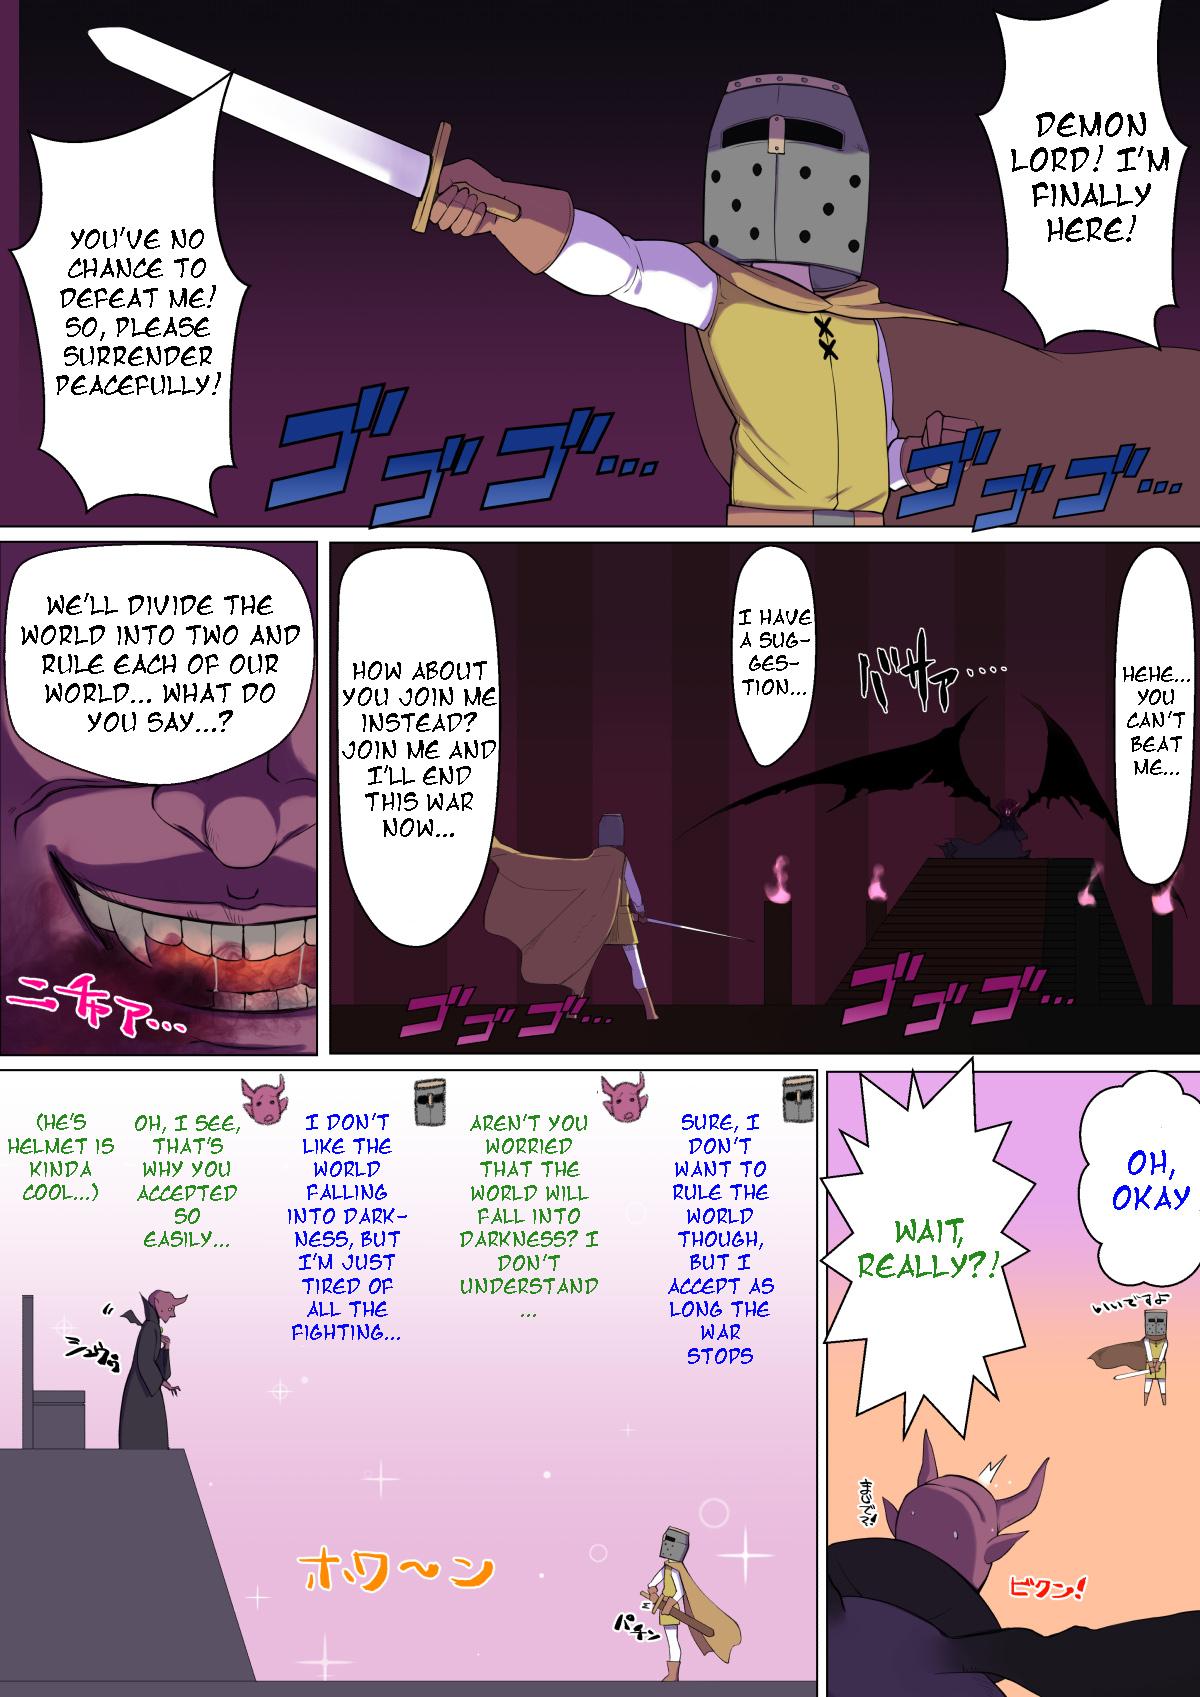 Blow Job Contest Fell into darkness, and was captured by a Succubus mom Rimjob - Page 2